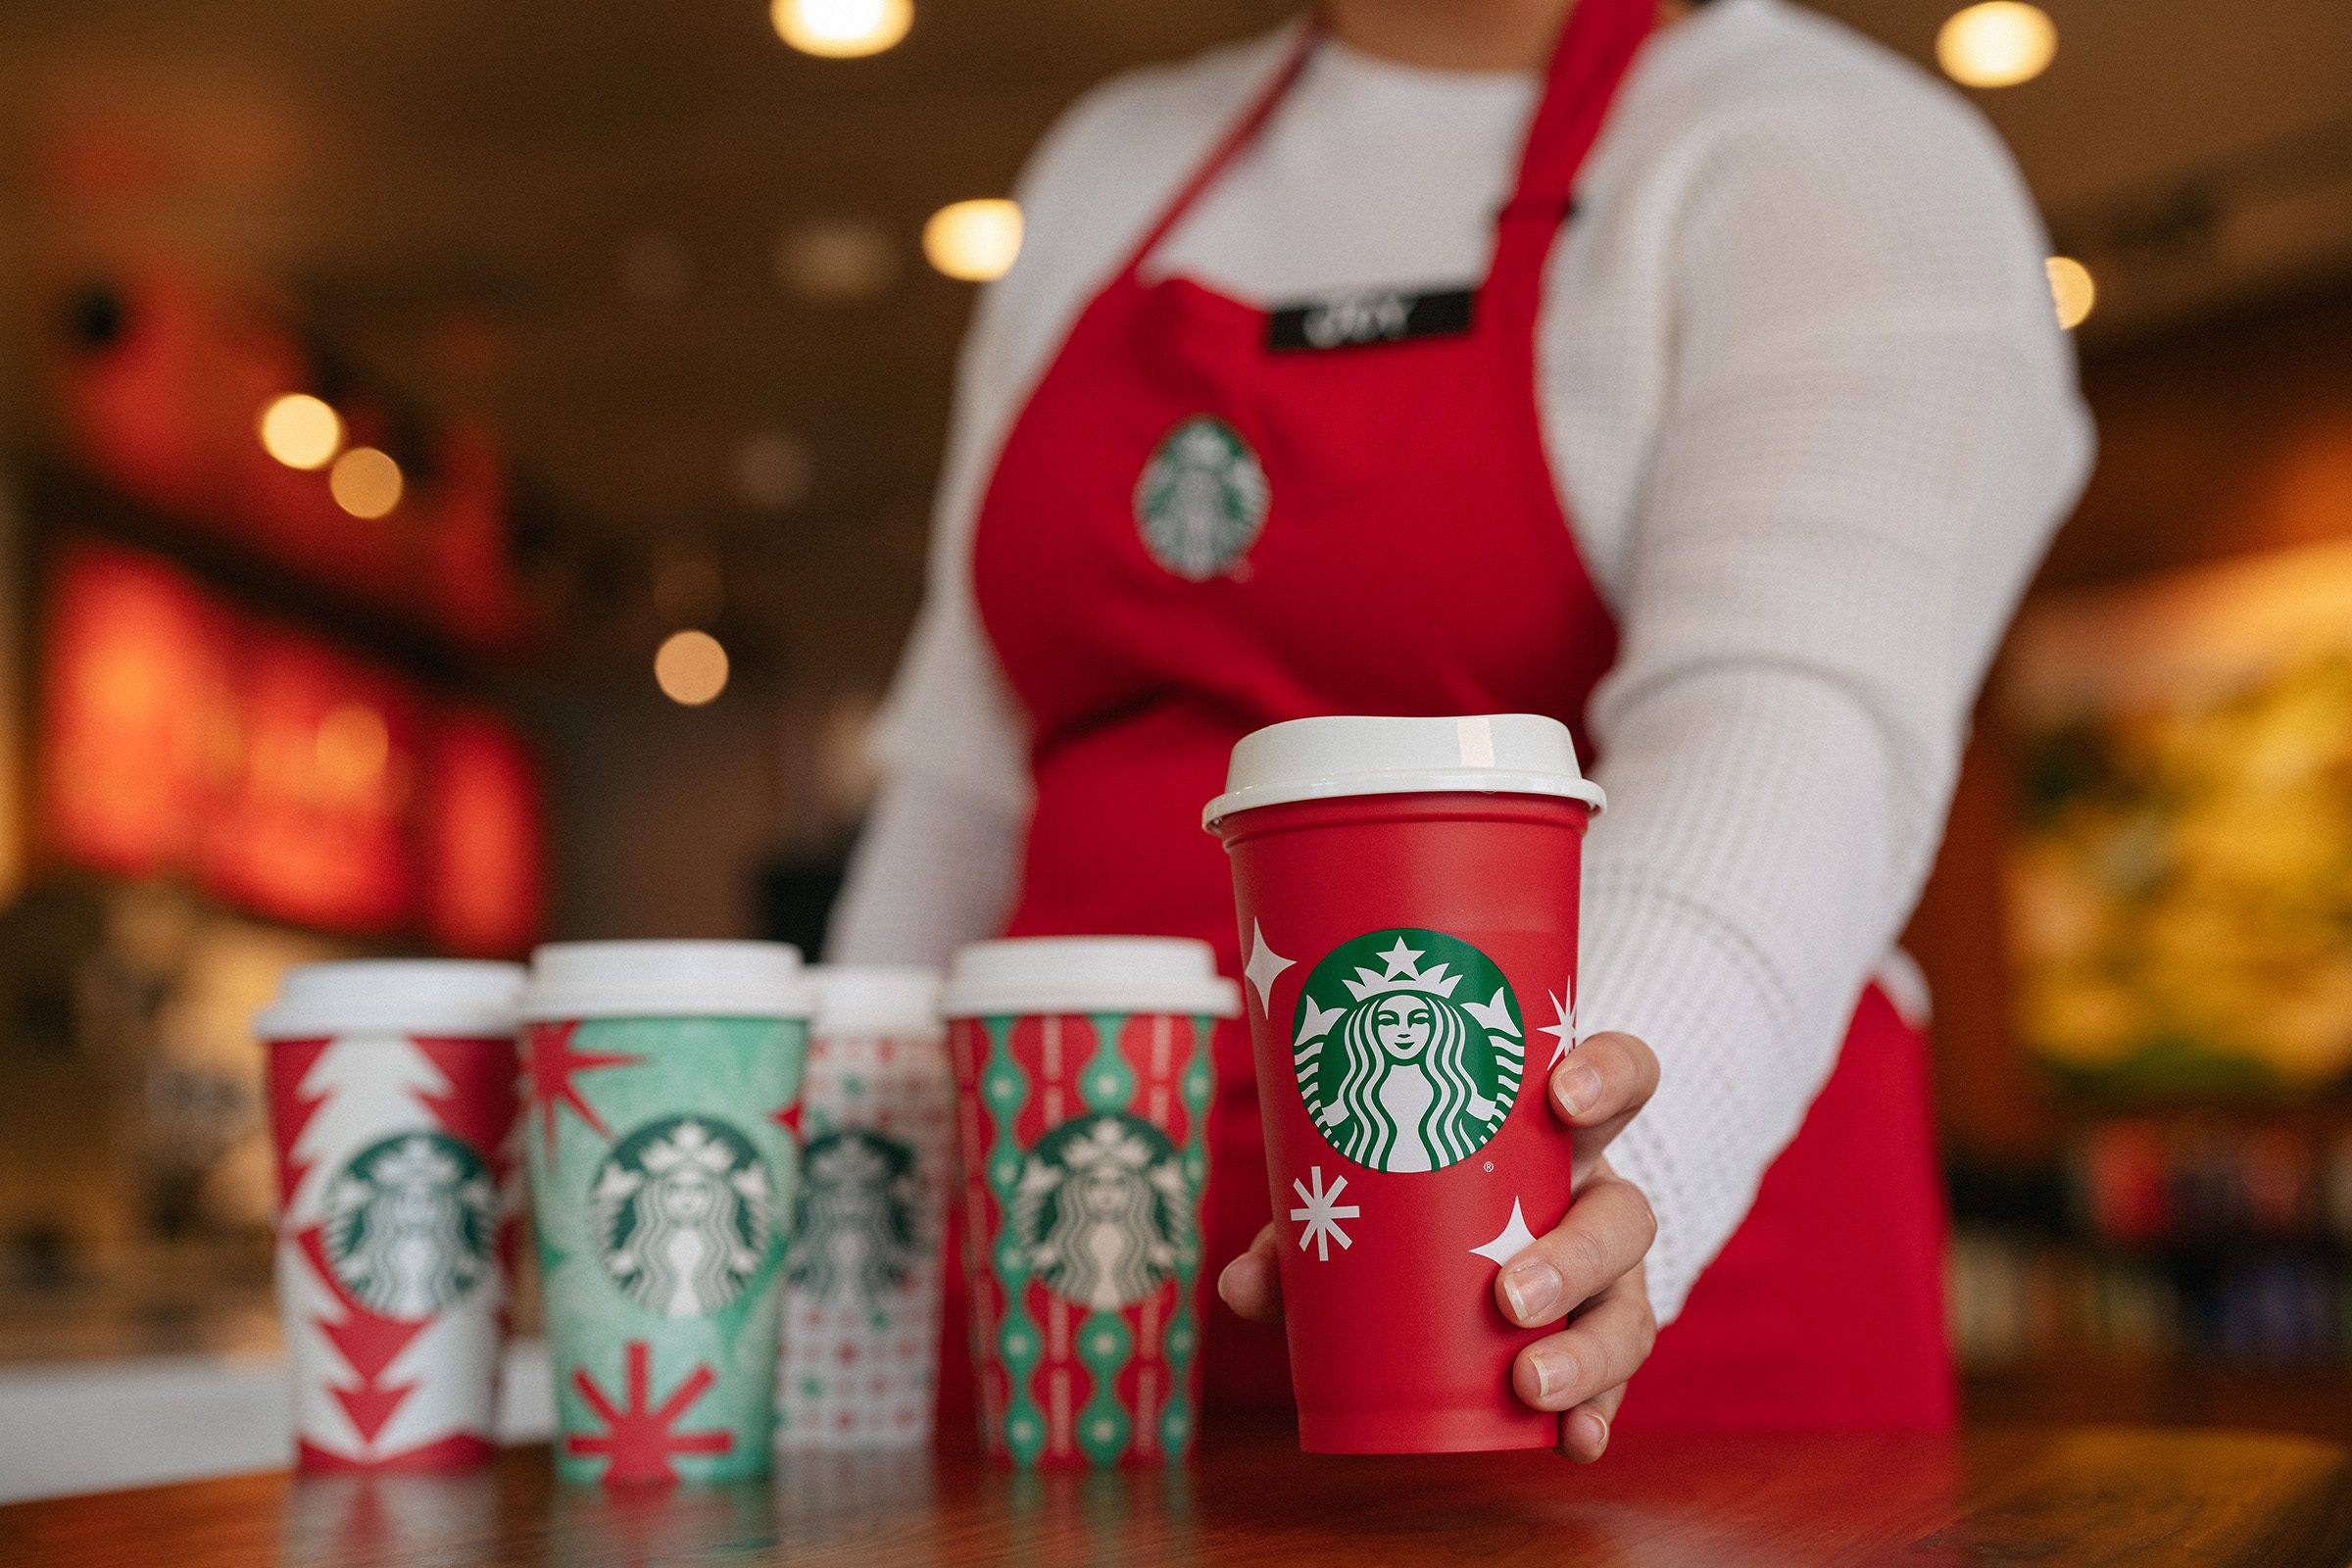 https://www.tasteofhome.com/wp-content/uploads/2021/11/Starbucks-Reusable-Red-Cup-Full-Lineup-DH-Resize-TOH.jpg?fit=700%2C1024